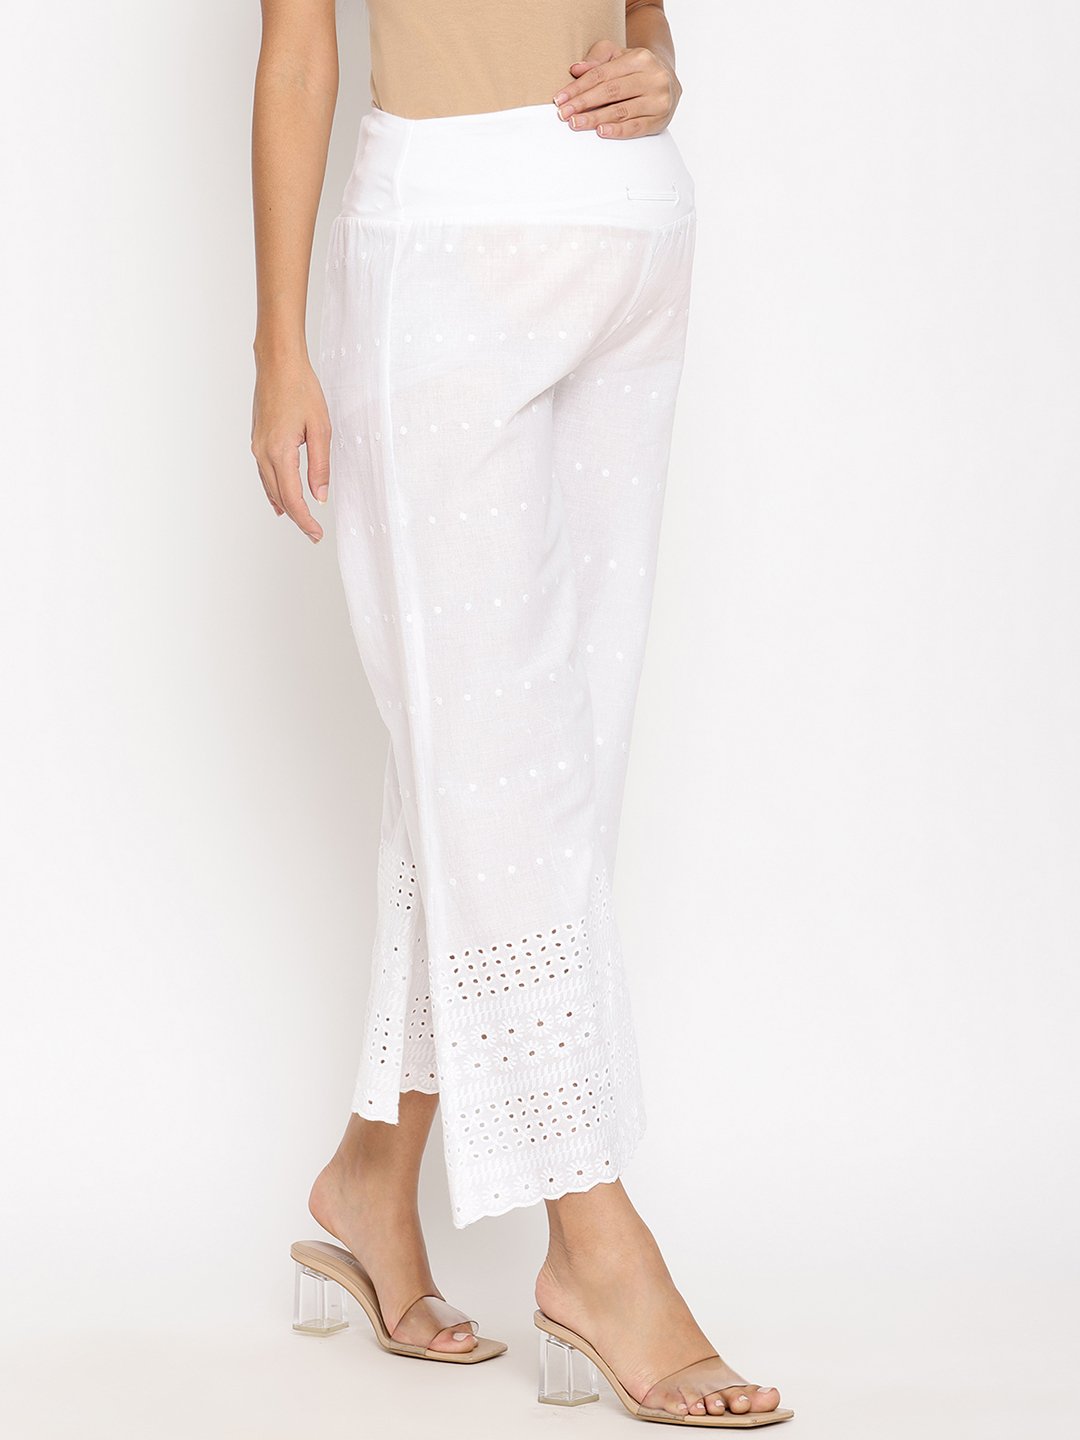 Buy AND Off White Palazzo Trousers - Palazzos for Women 1733204 | Myntra